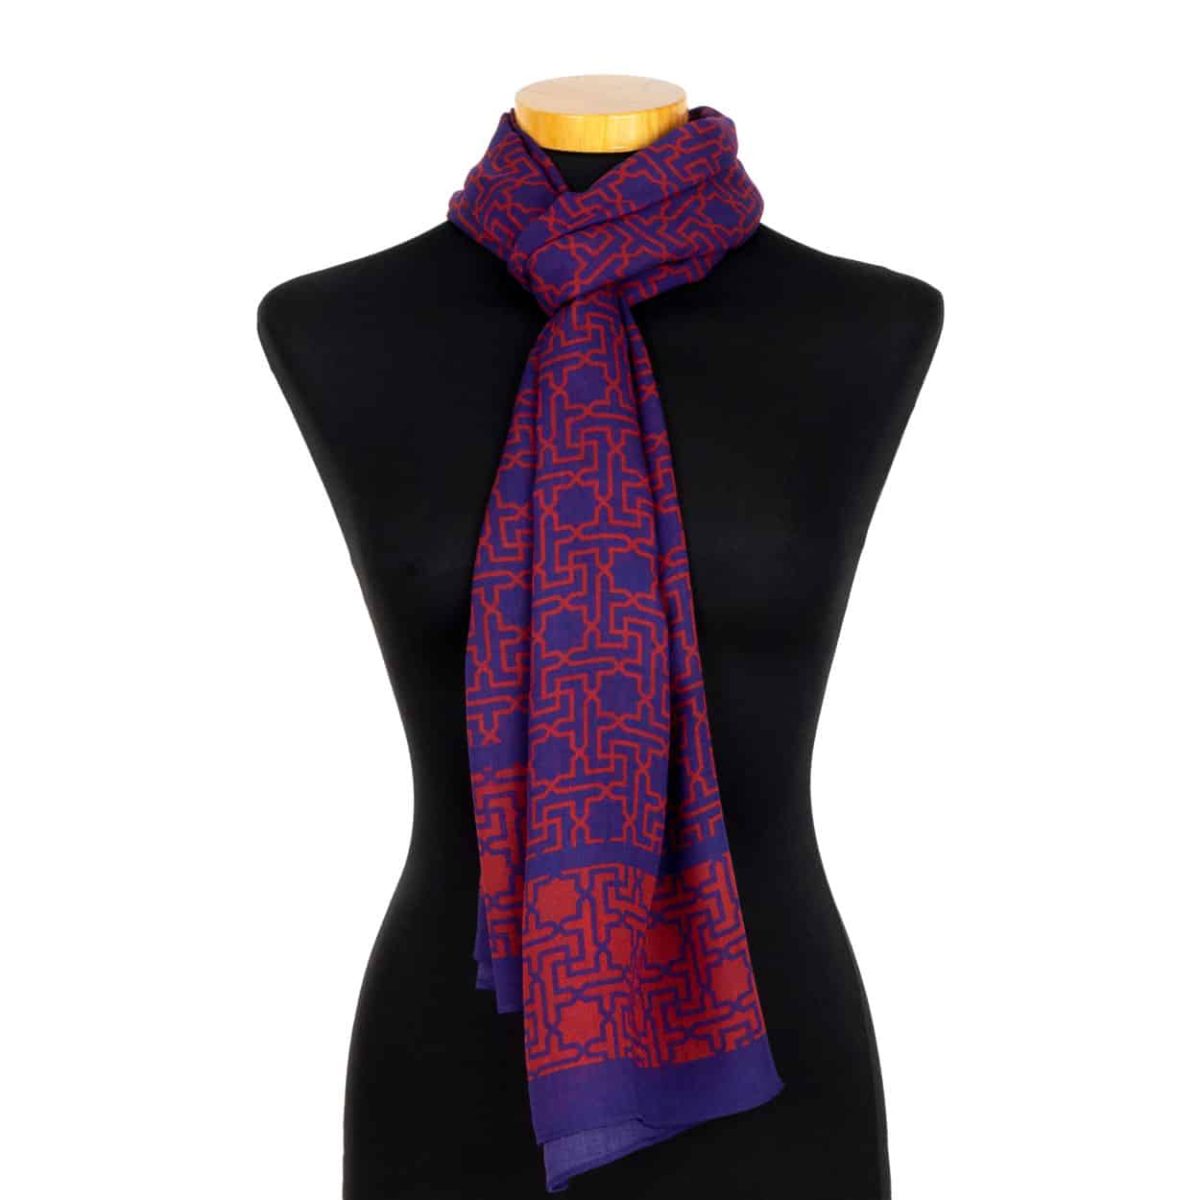 Blue and red scarf for the neck